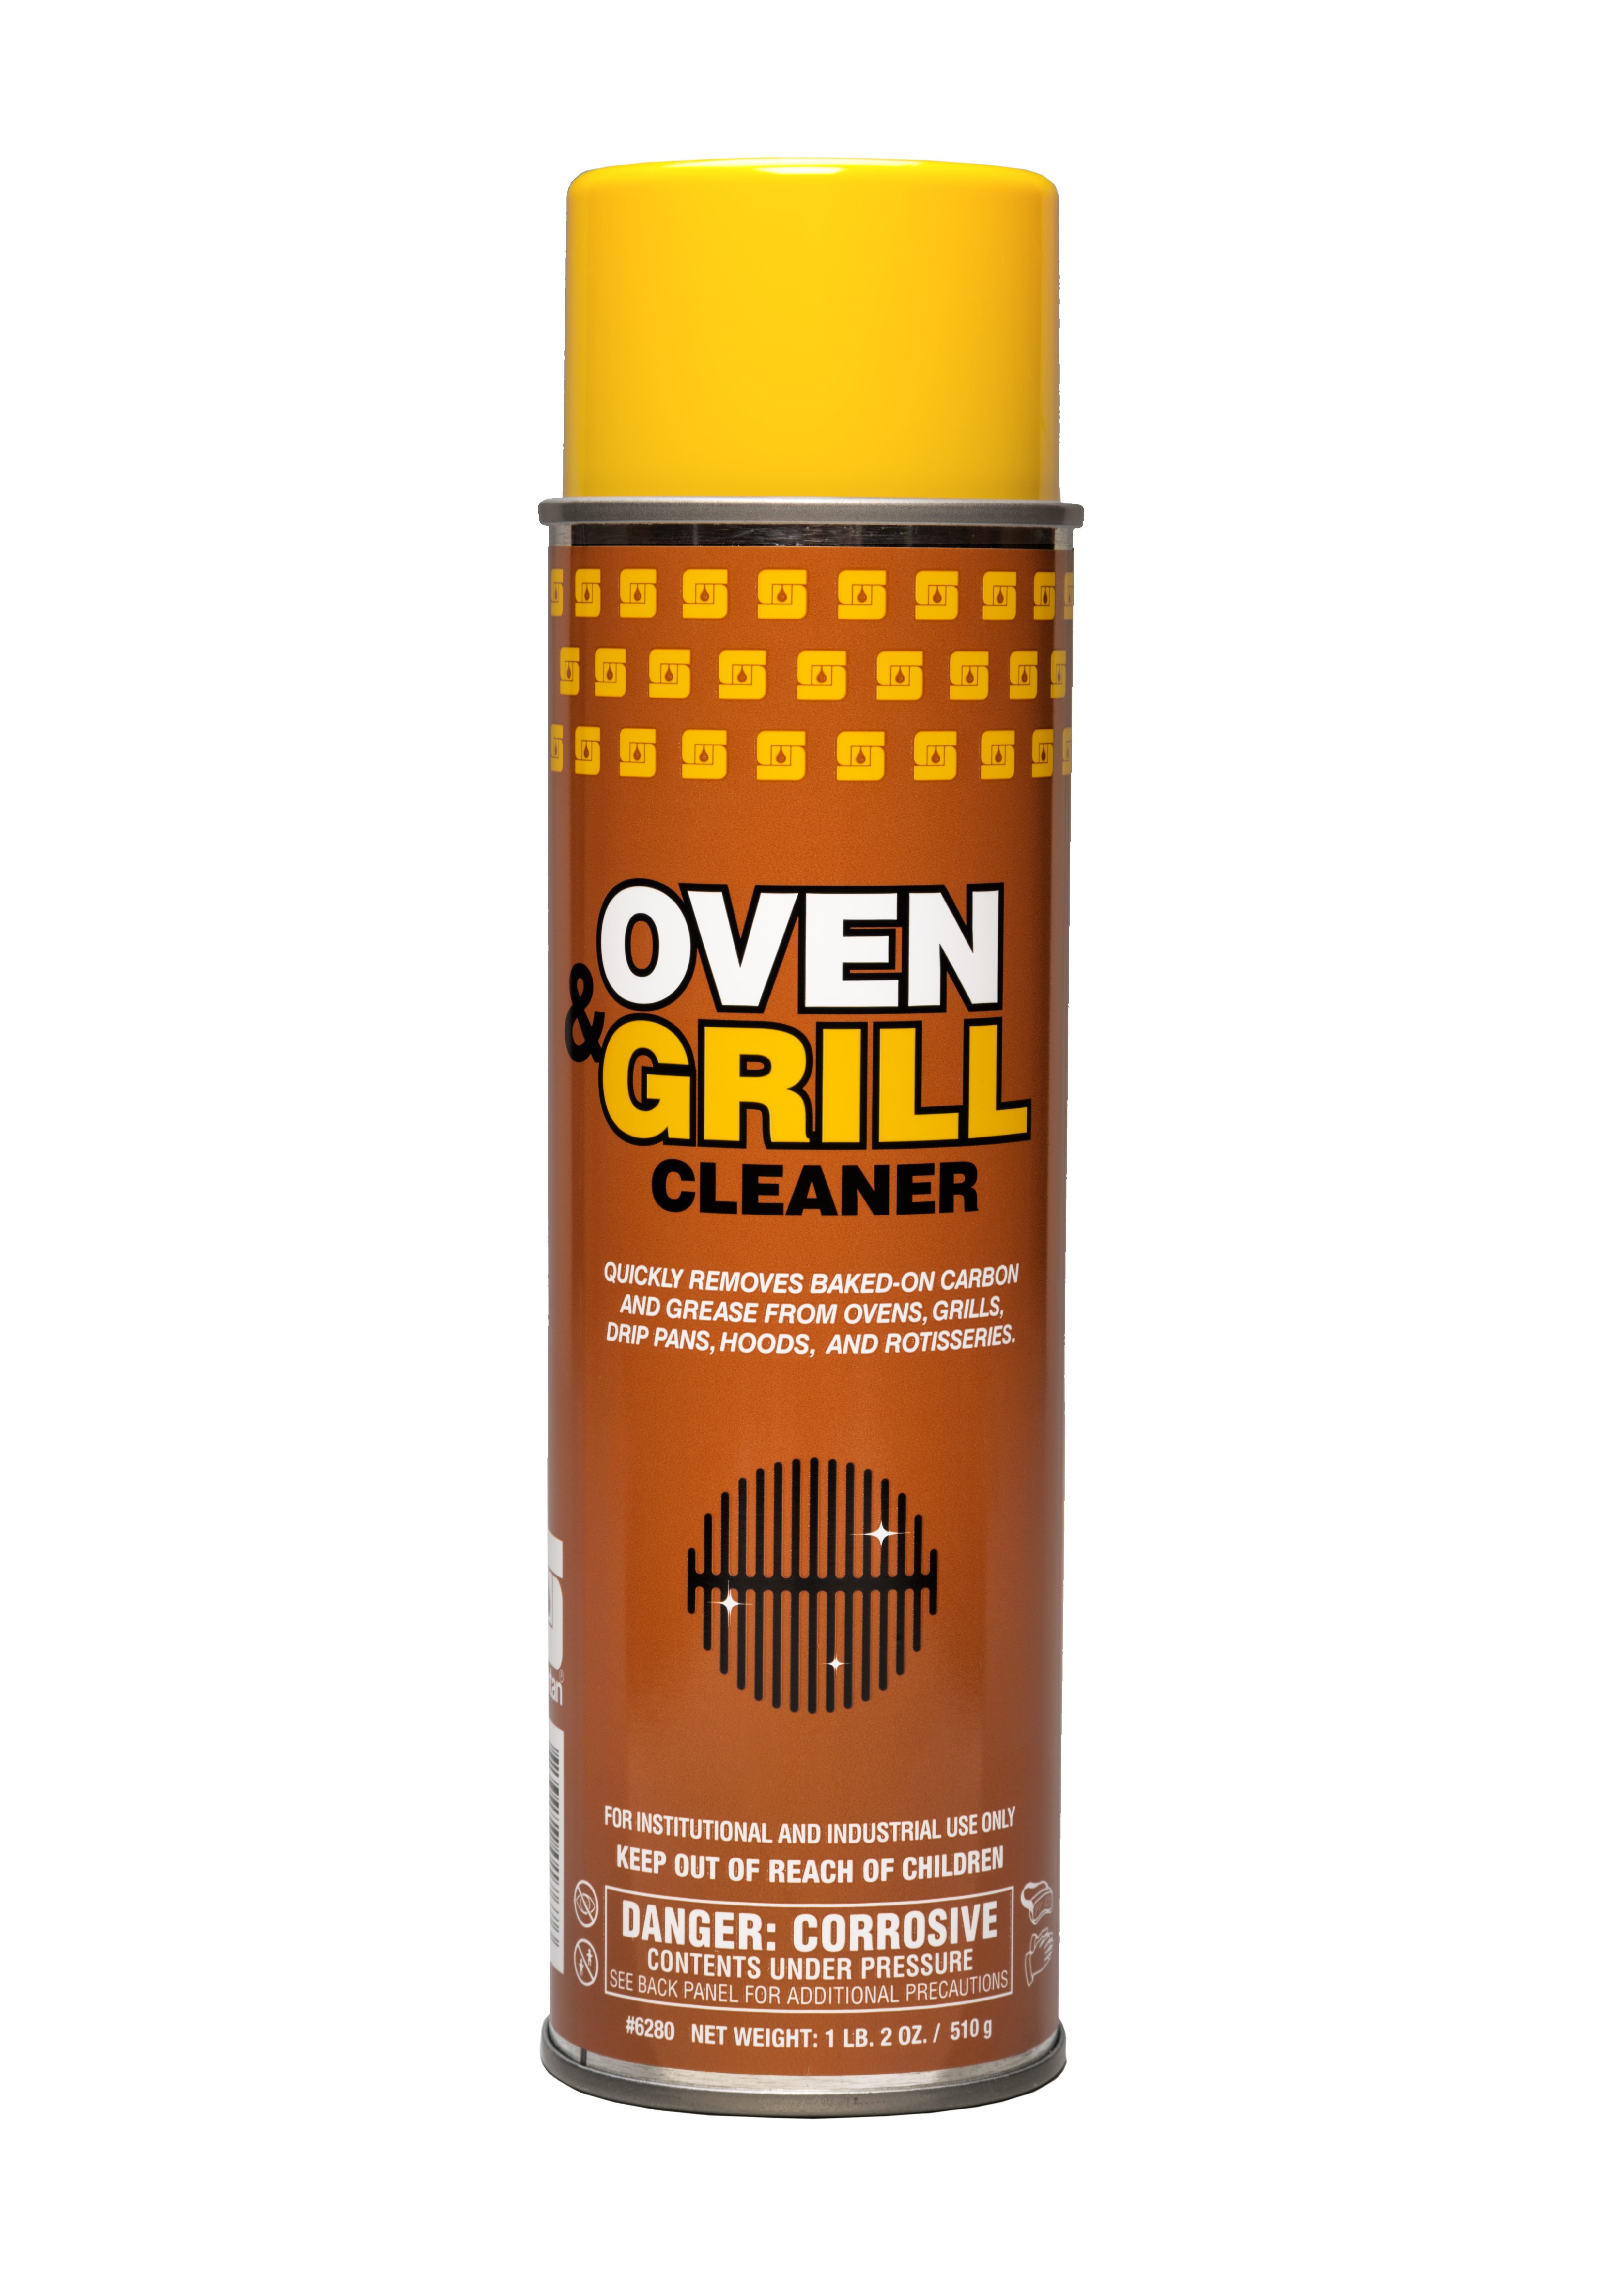 Spartan Chemical Company Oven & Grill Cleaner, 12-20 OZ.CAN